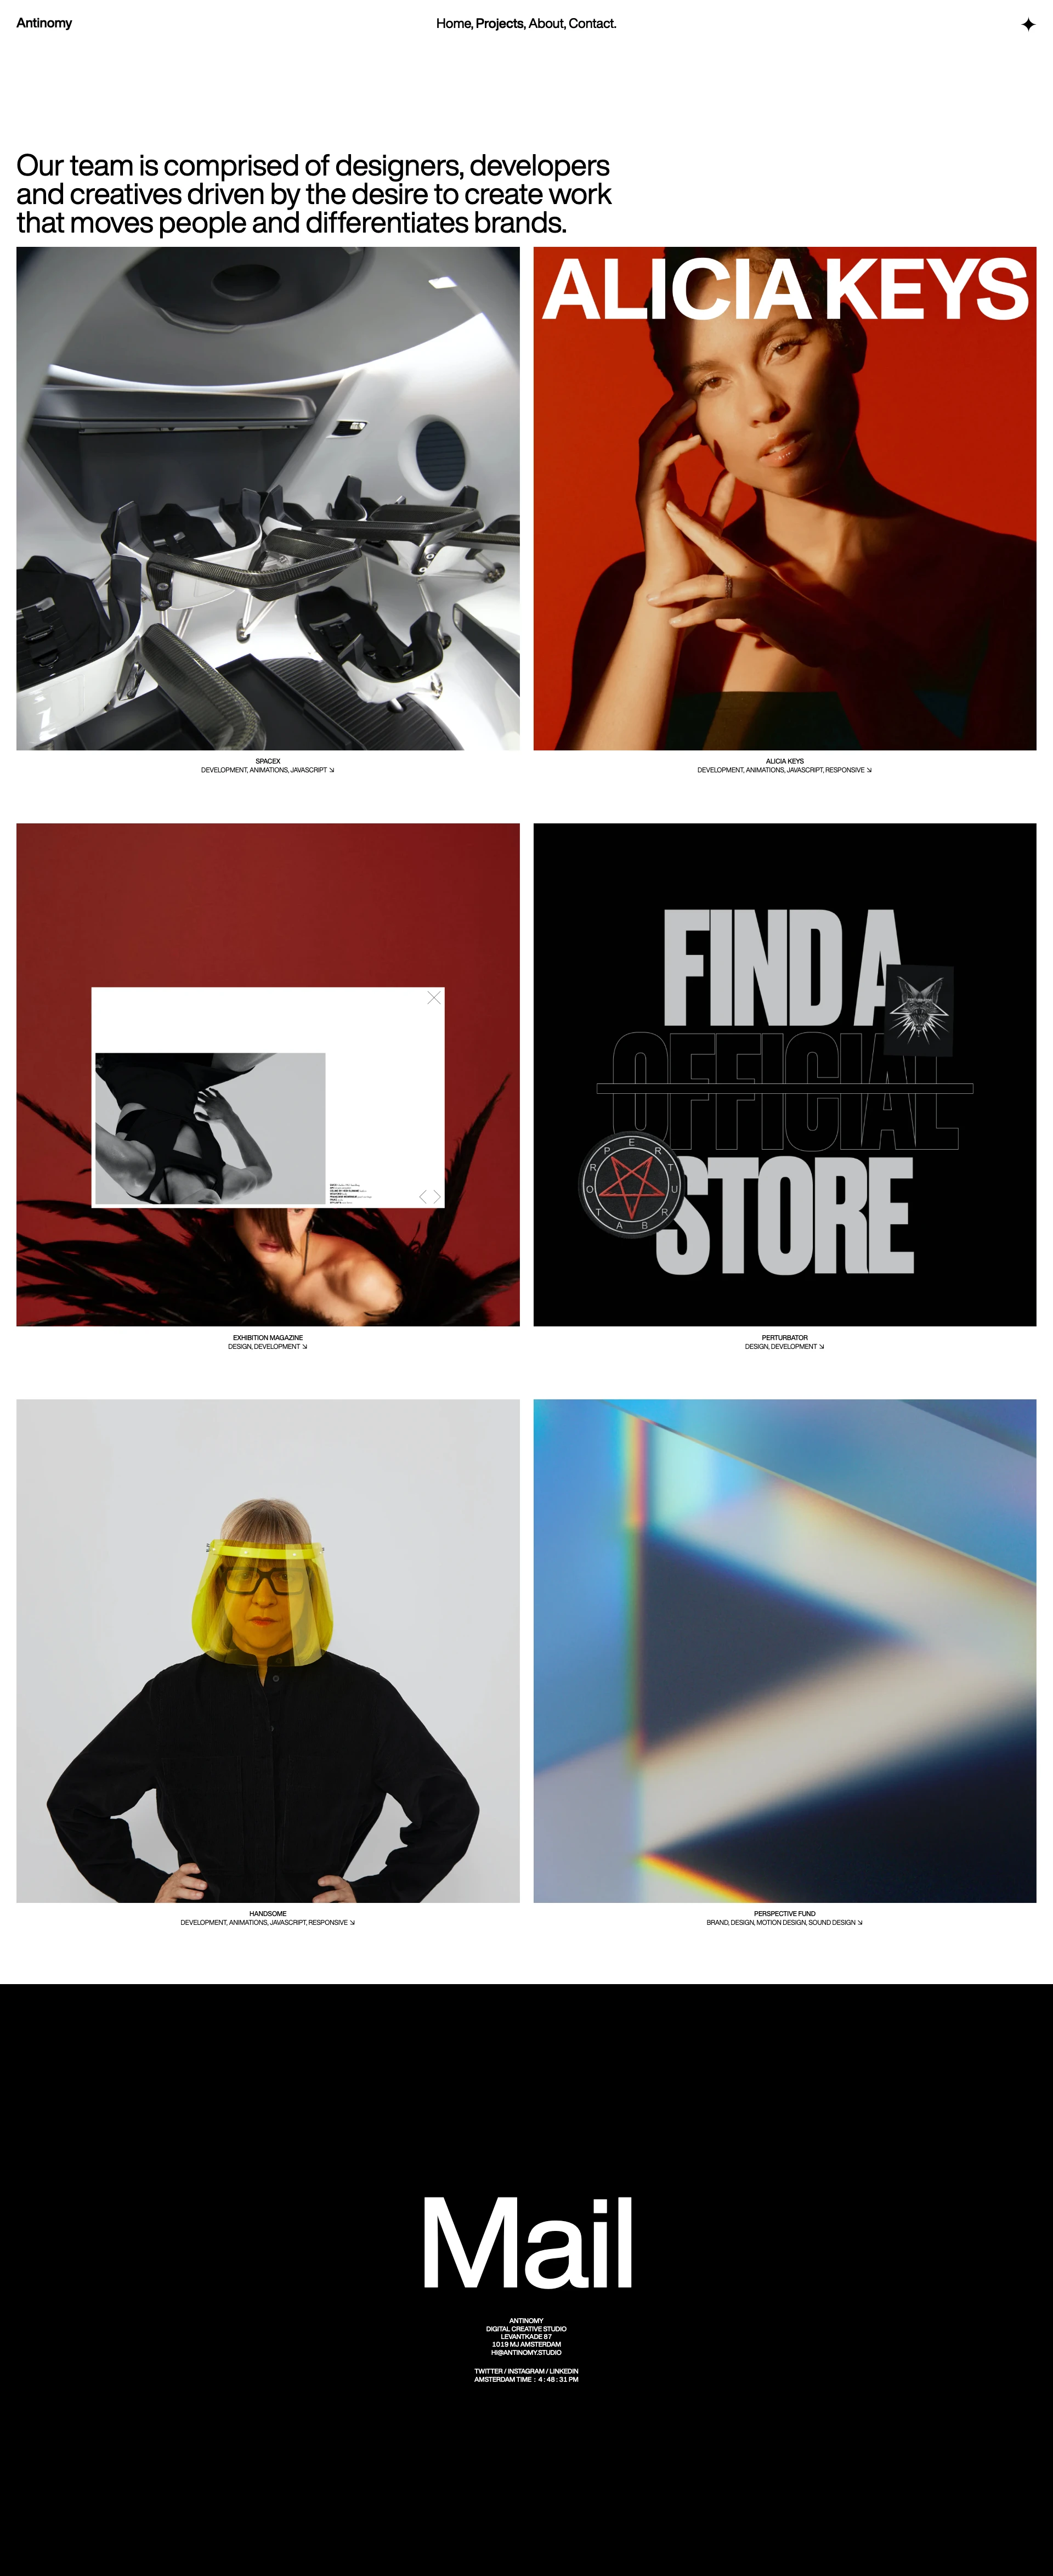 Antinomy Studio Landing Page Example: Antinomy is a global creative studio building contemporary brands in the digital realm. We create immersive digital spaces that are challenging the ways people interact with brands.